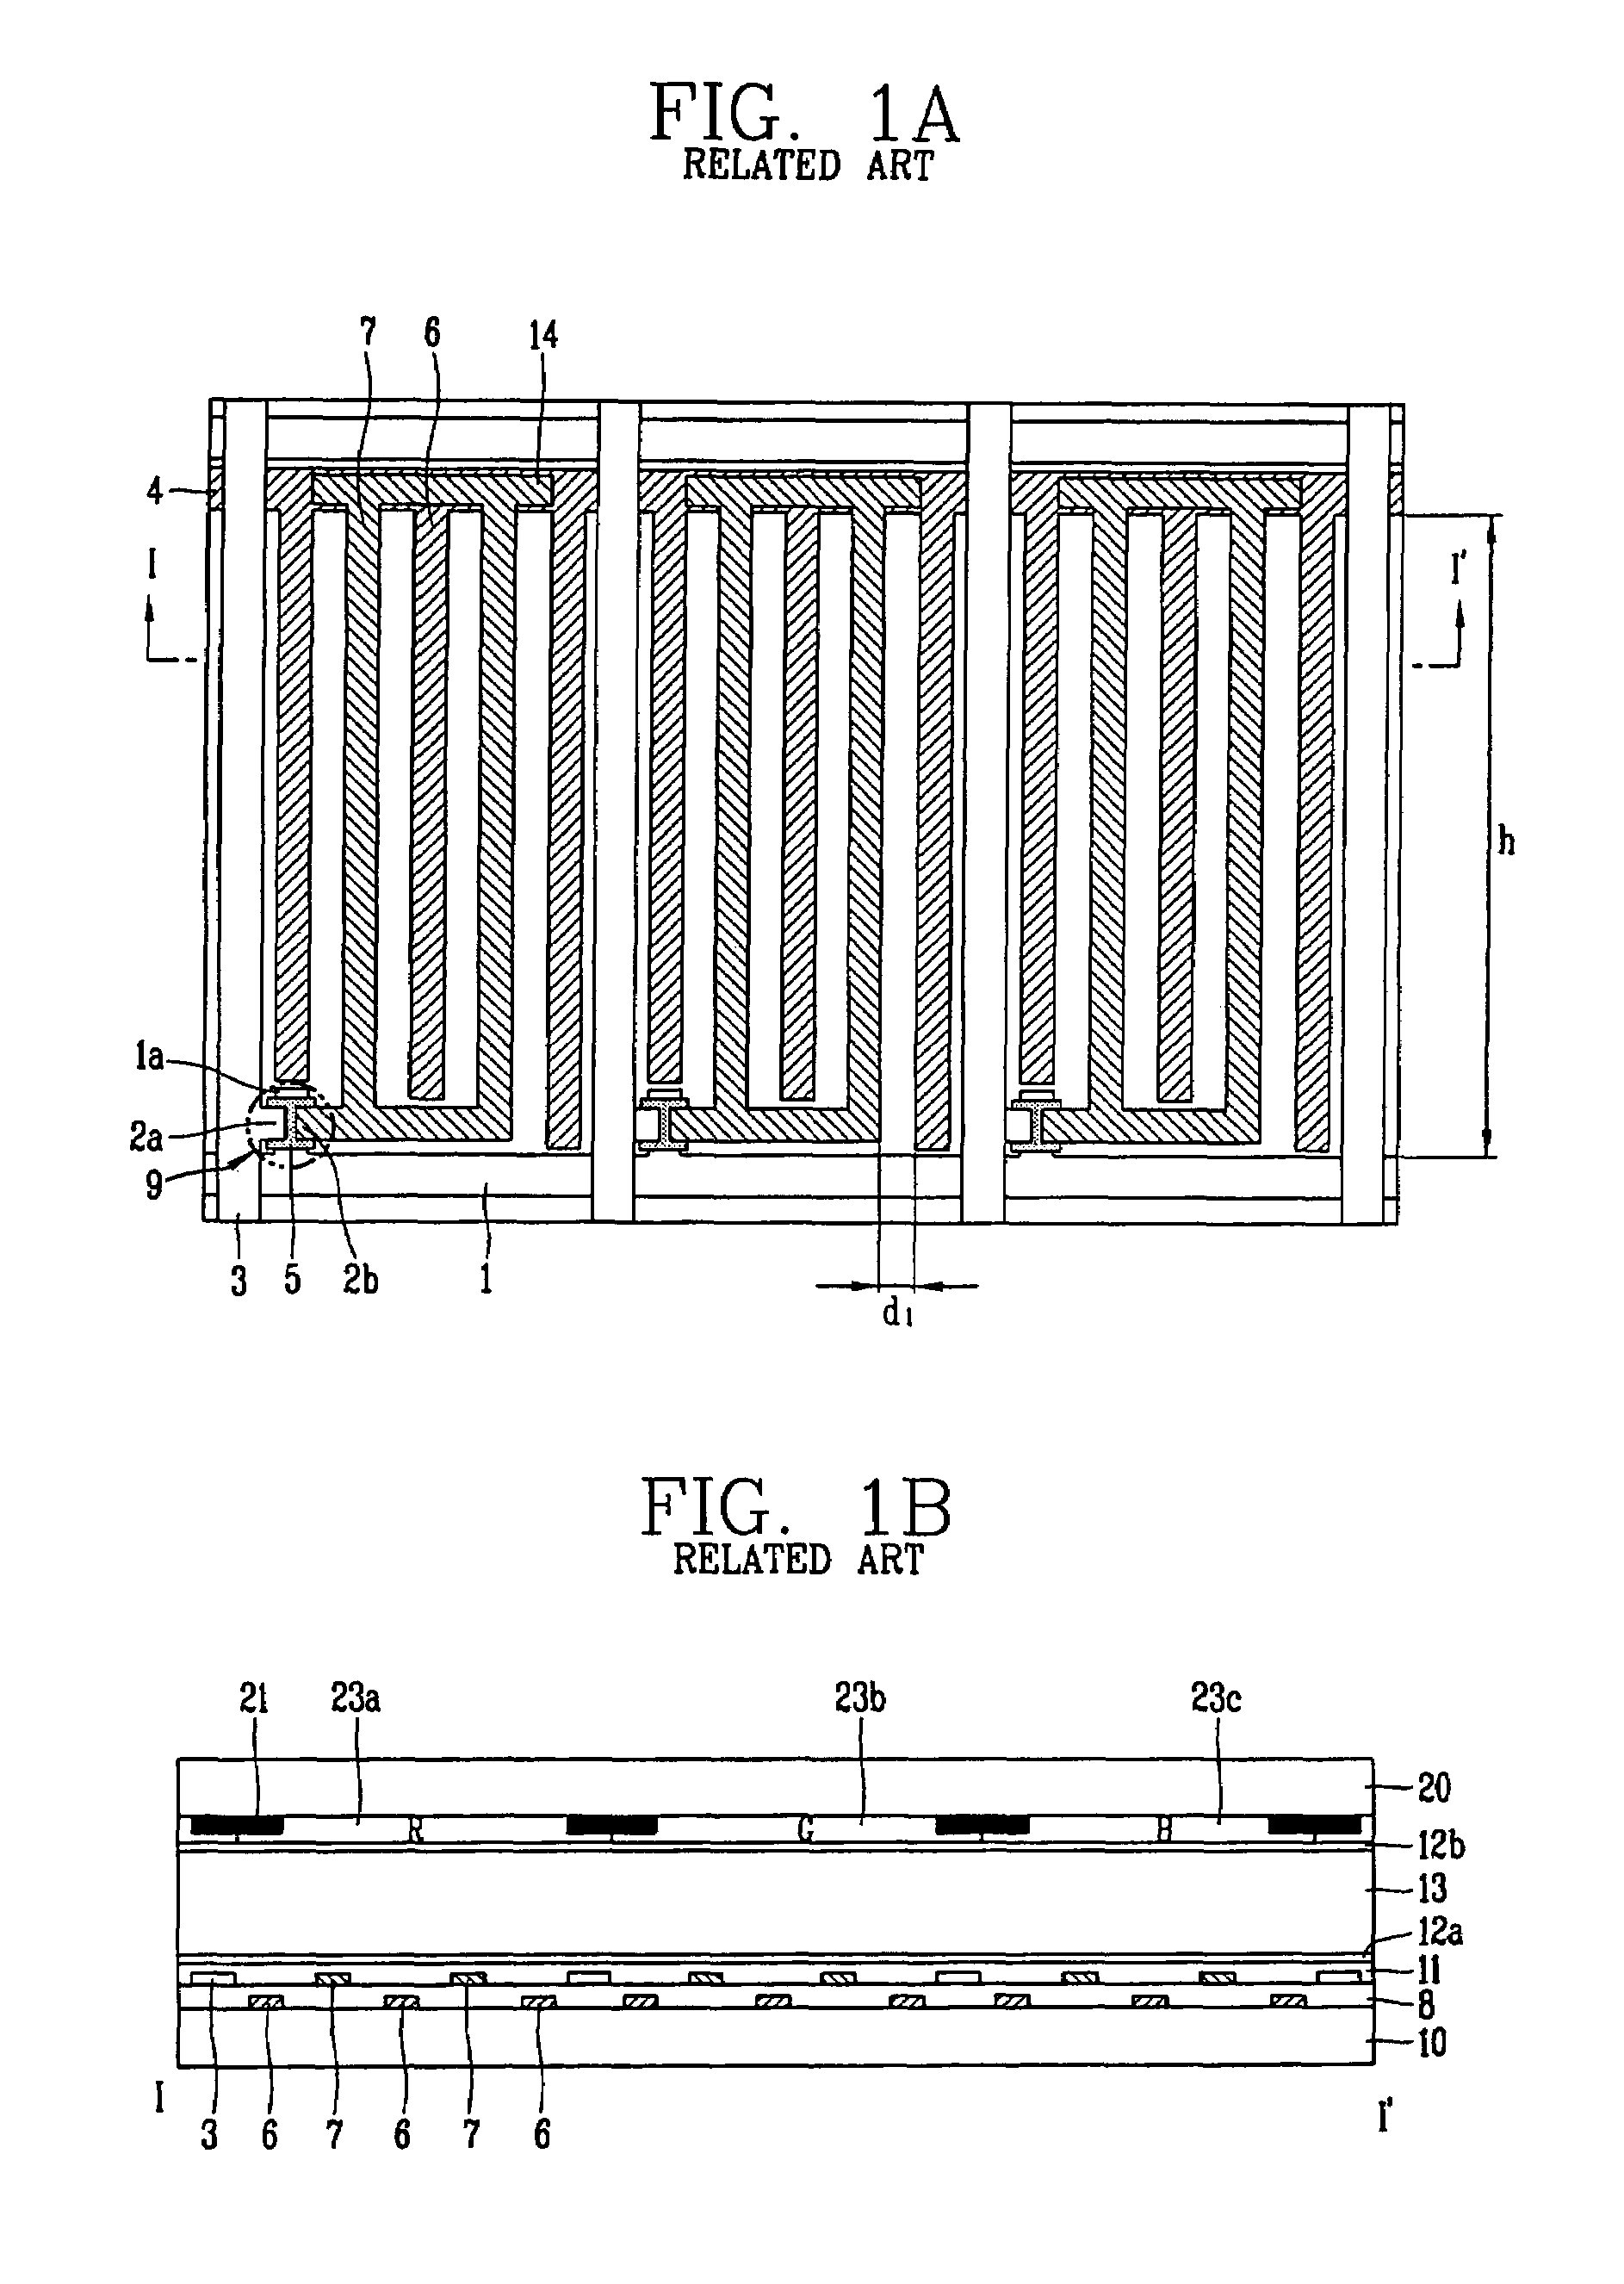 Plane switching mode liquid crystal display device having storage lines overlapping gate line and common line, and fabrication method thereof